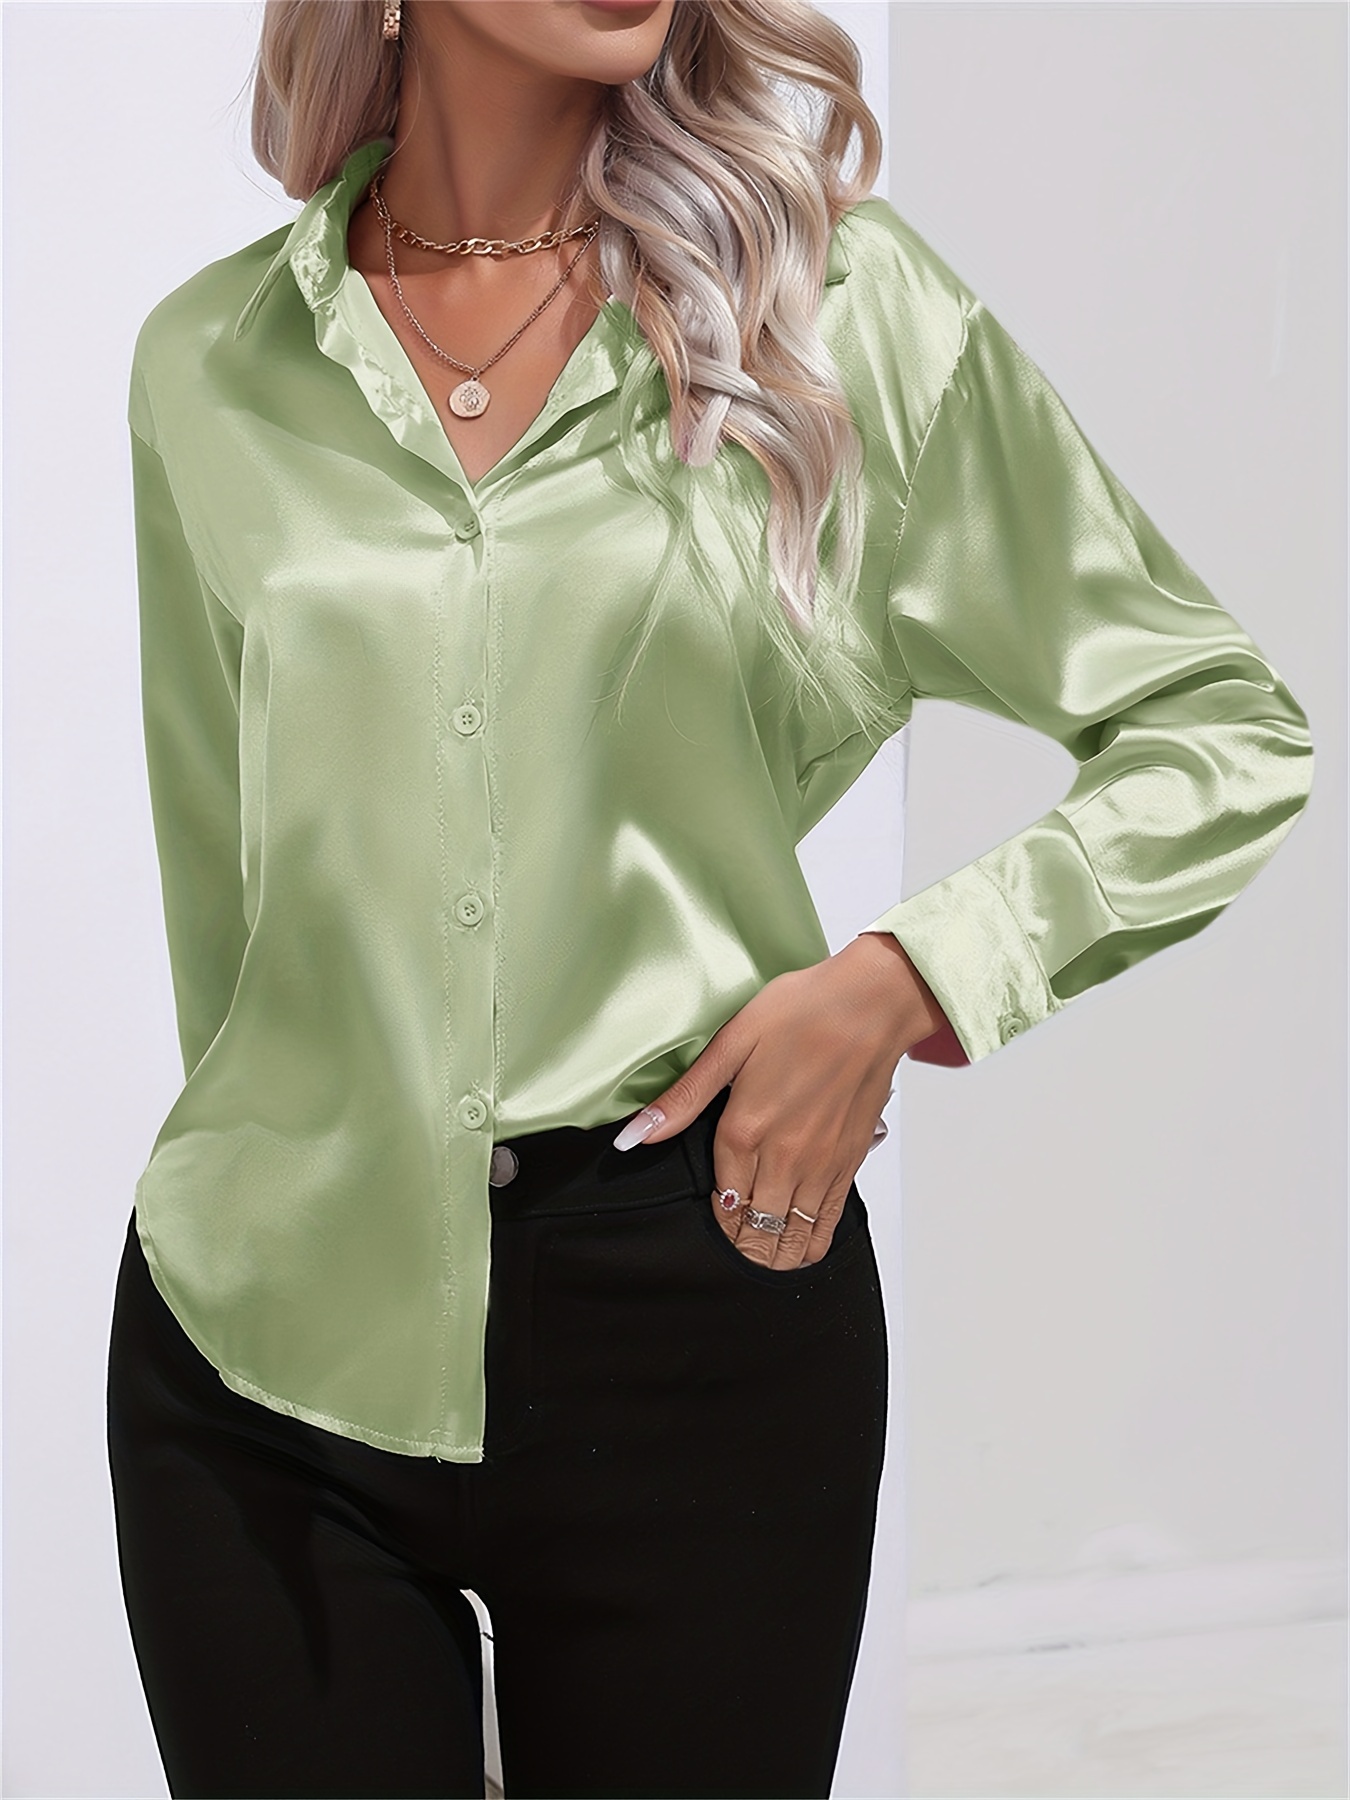 solid smoothly shirt, solid smoothly shirt elegant button front turn down collar long sleeve shirt womens clothing details 63